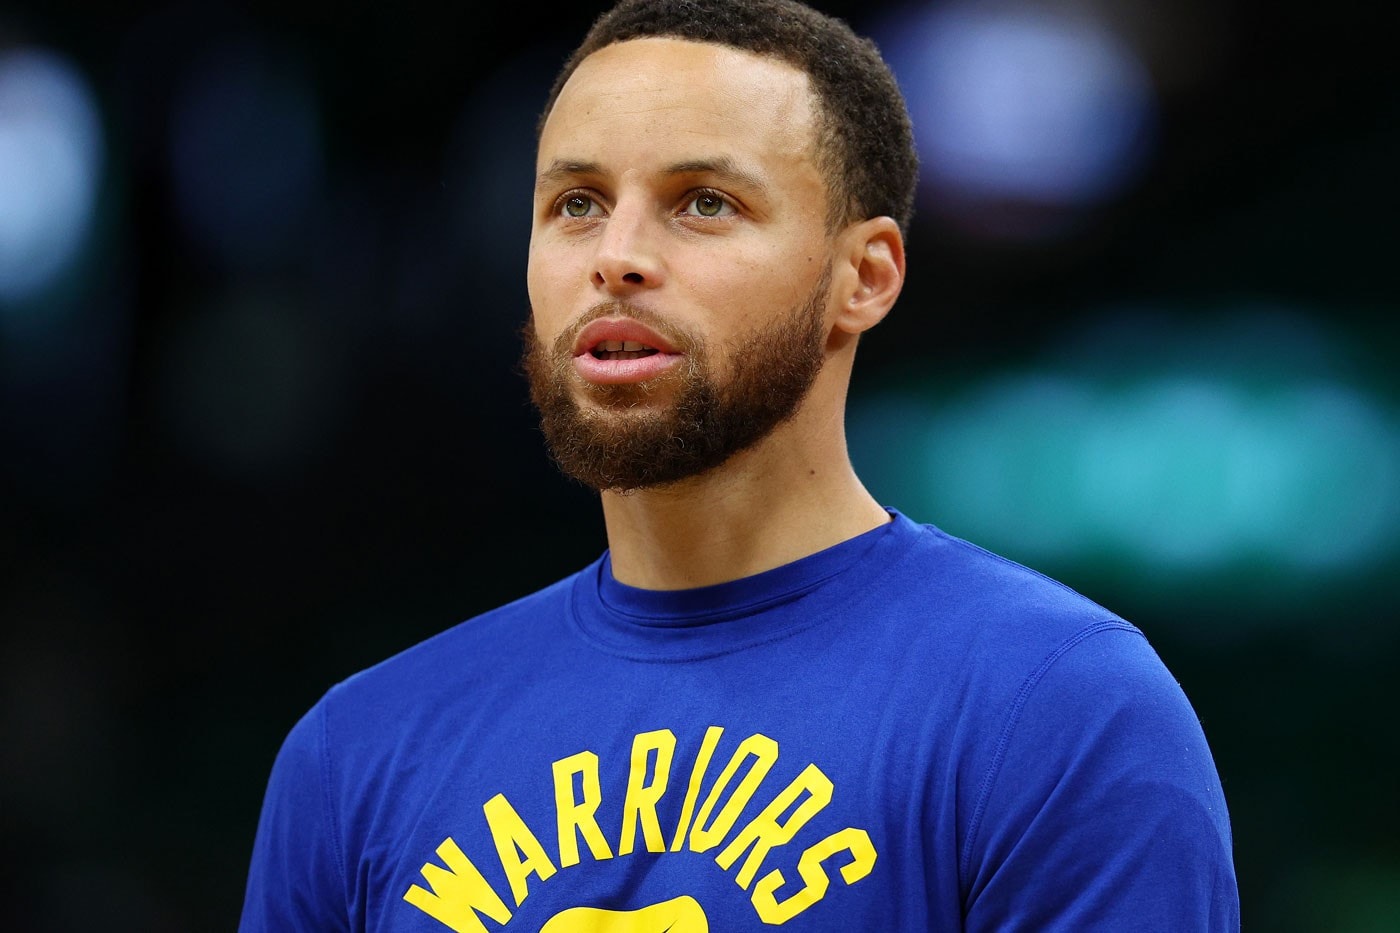 Steph Curry sinks five full court shots in a row video Sports Illustrated NBA golden state warriors basketball SI